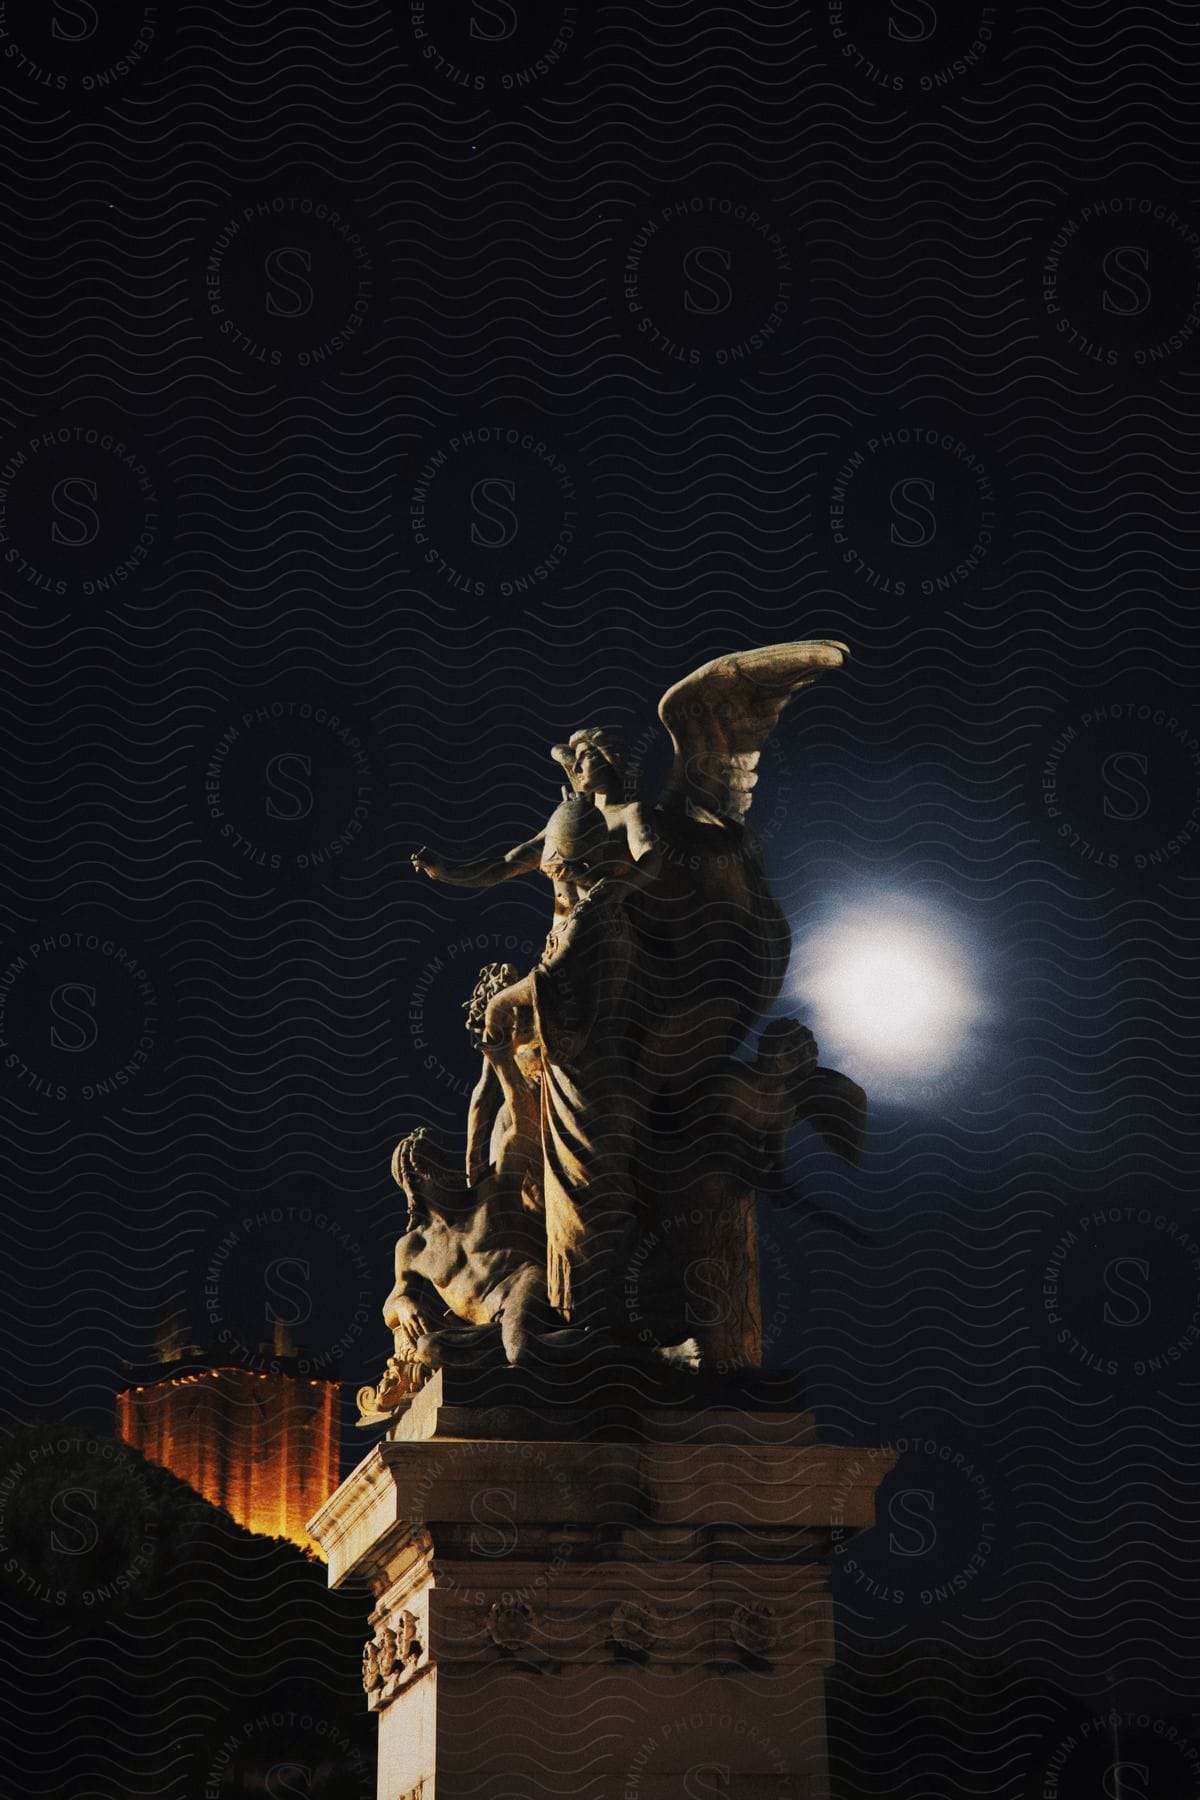 Ancient statues illuminated by the full moon.